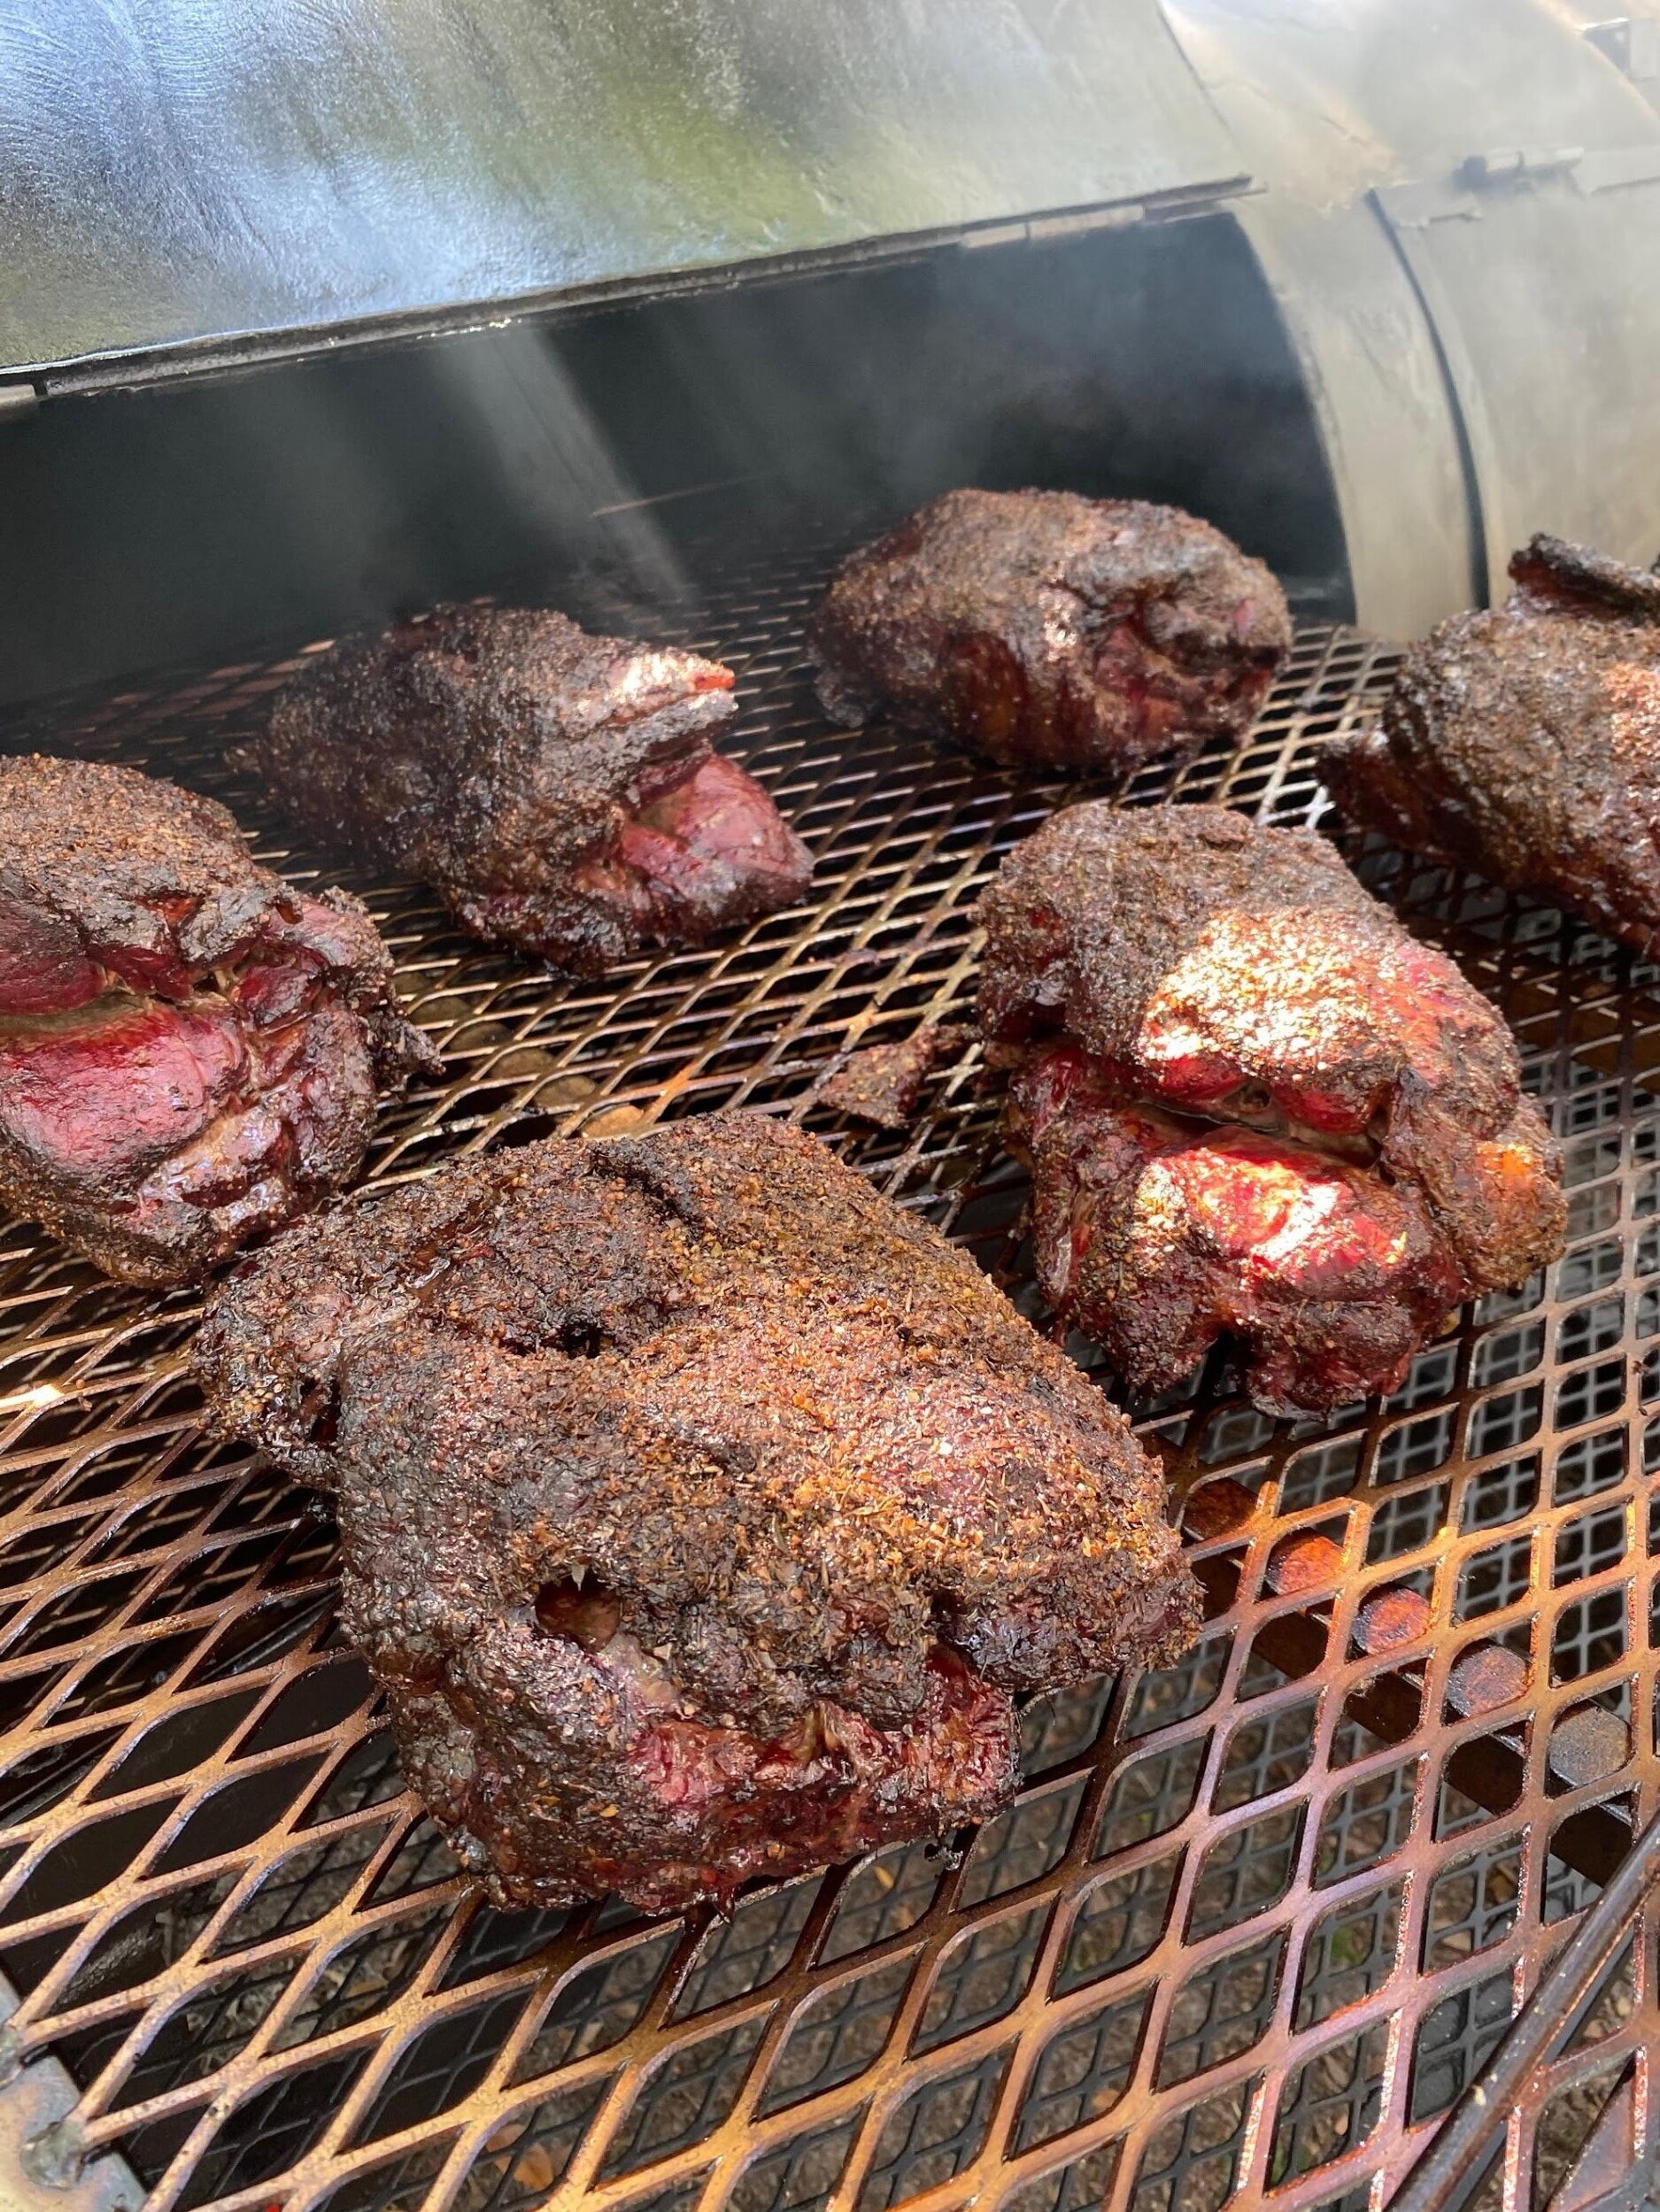 These are my lamb shoulders with my Granny G Lamb rub, these are cooked over Pecan. Lamb is not as popular as it is Australia and people are super inquisitive about it. I am super stoked when folks respond well later on when the event starts.